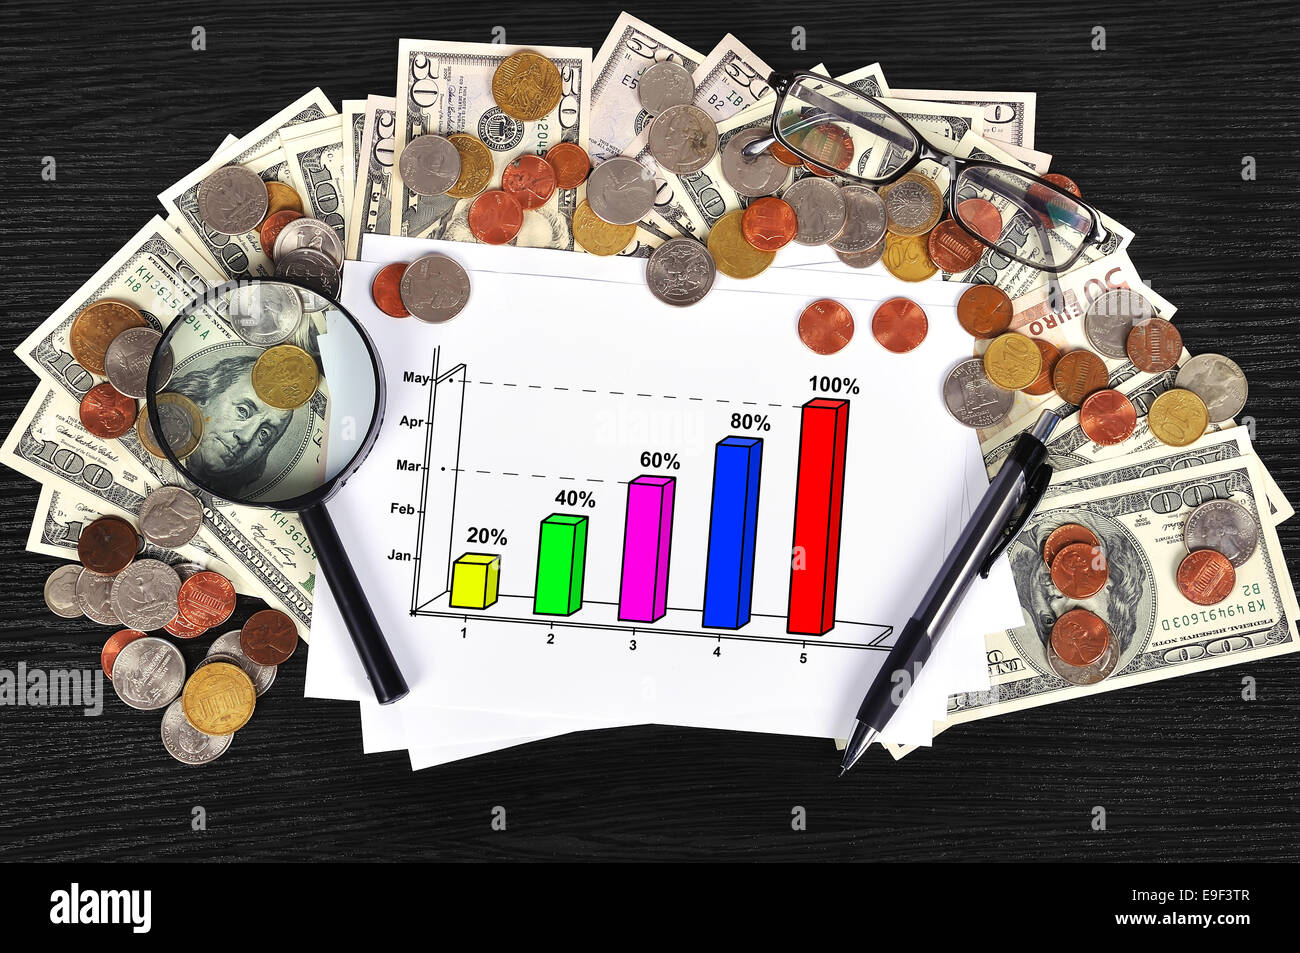 money on table and paper with chart Stock Photo